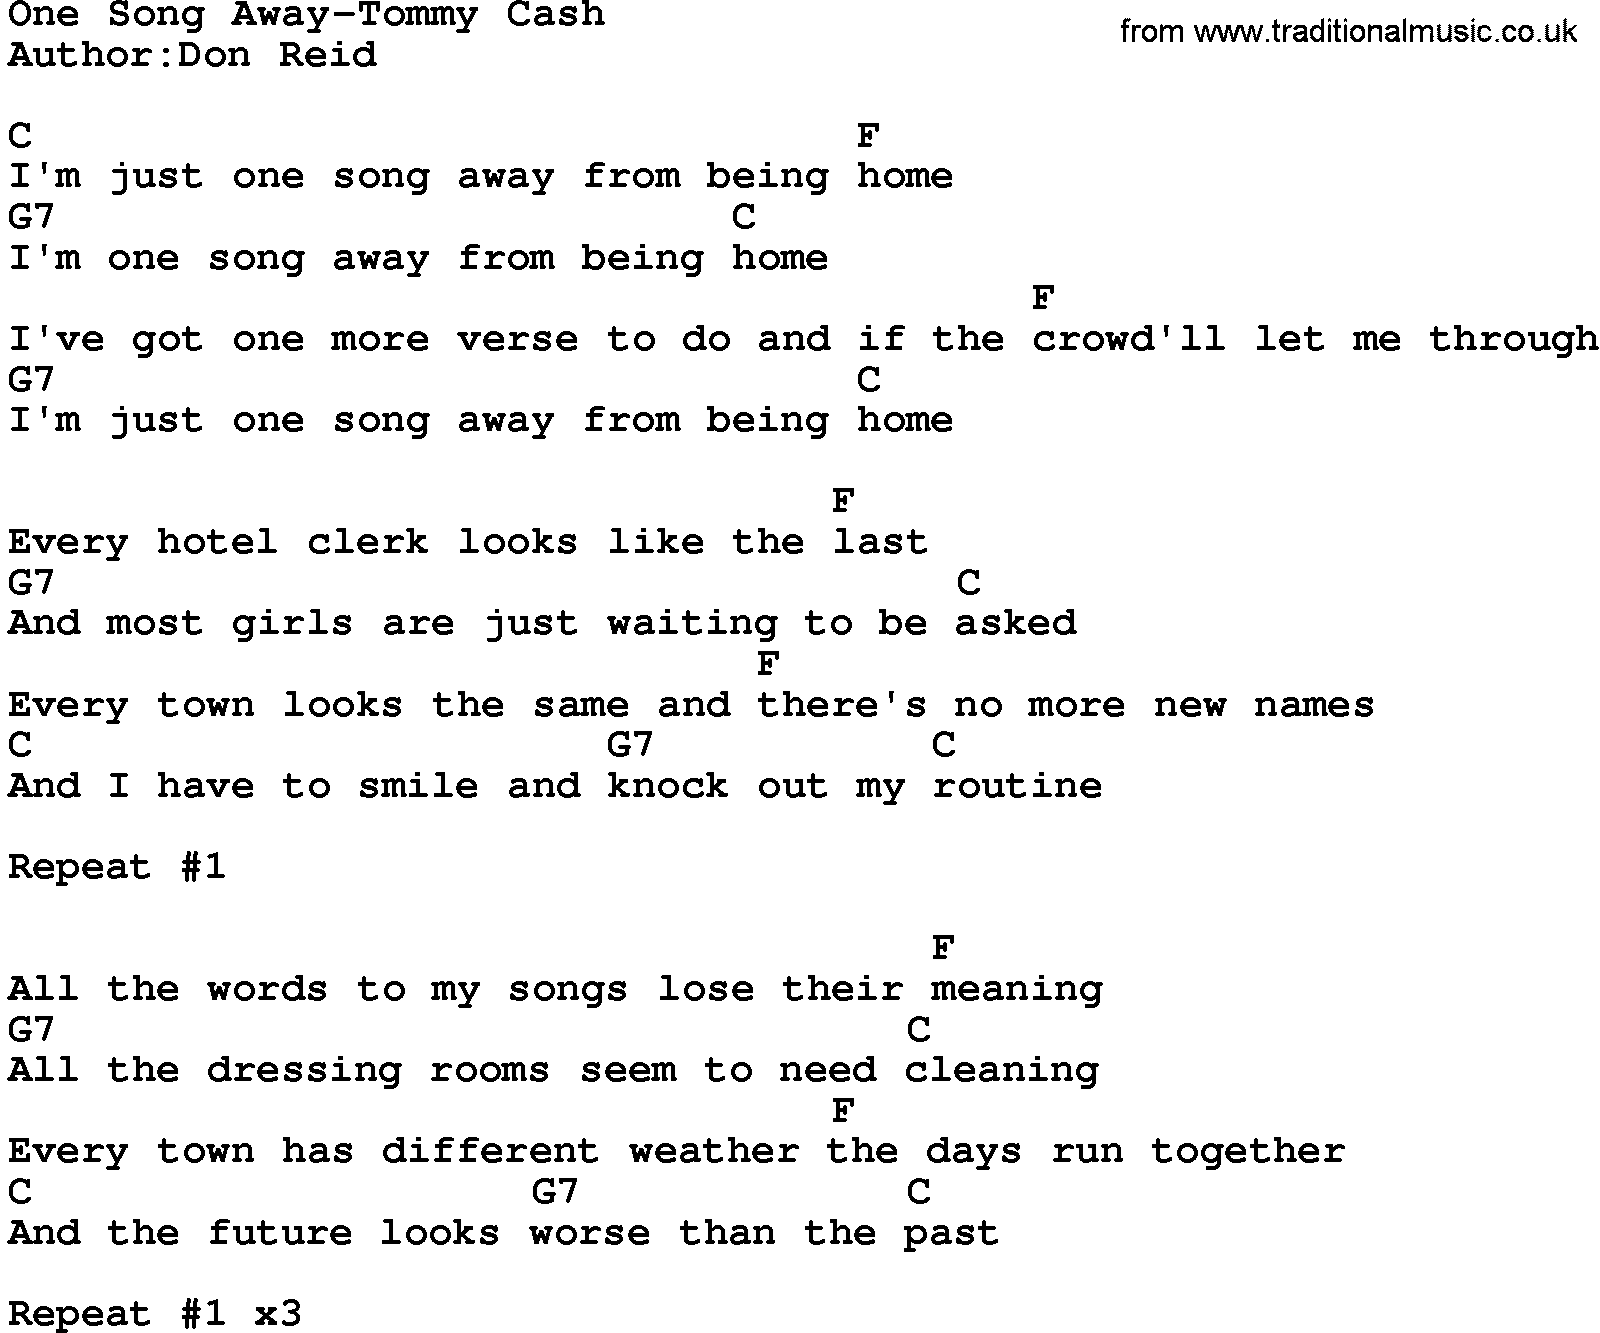 Country music song: One Song Away-Tommy Cash lyrics and chords